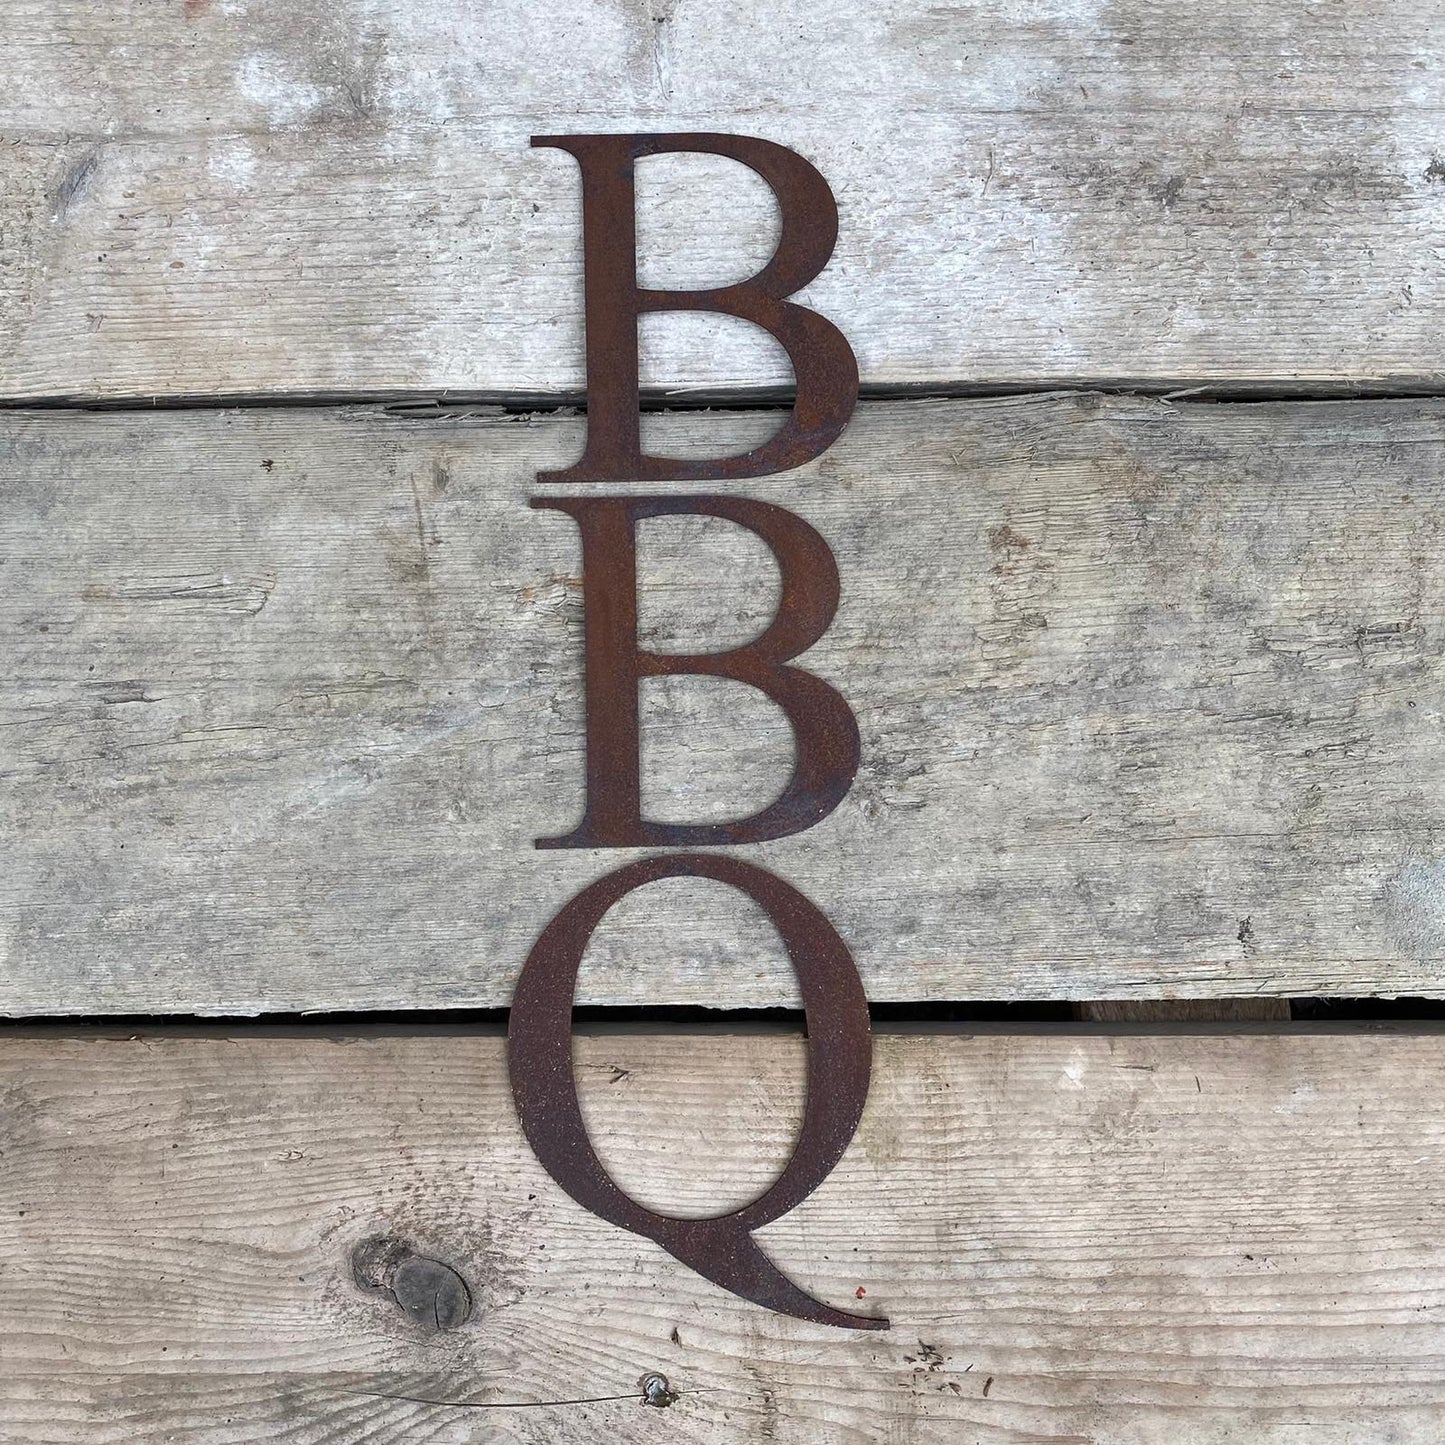 Rusty metal classic style lettering spelling out BBQ